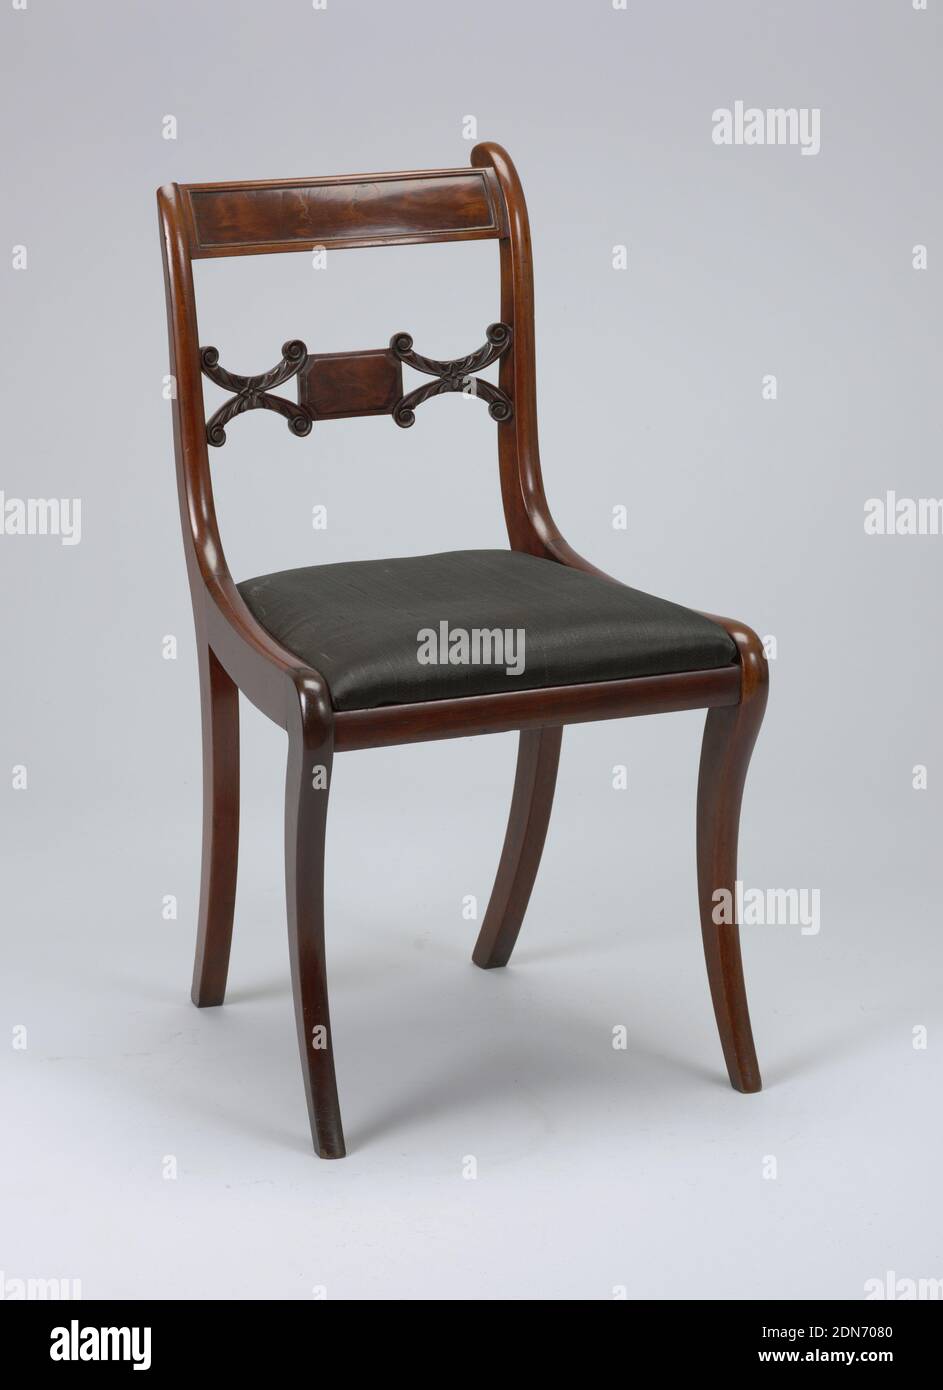 Chair, wood (mahogany), wood (poplar), horse hair, Back legs flat sided, front legs flat excepting rounded front face; legs curve outward toward bottom, and back legs incline toward eachother at bottom. Corner posts of back in a double curve terminating at top in on elemenatary volute form. Flat top rail bowed toward back, slightly arched, with a rectangular panel of inset veneer surrounded by beading. Splat horizontal, composed of small oblong faced with veneer, flanked oneither side by horizontal coupled C-scrolls deeply carved with foliage, terminating in volutes. Stock Photo